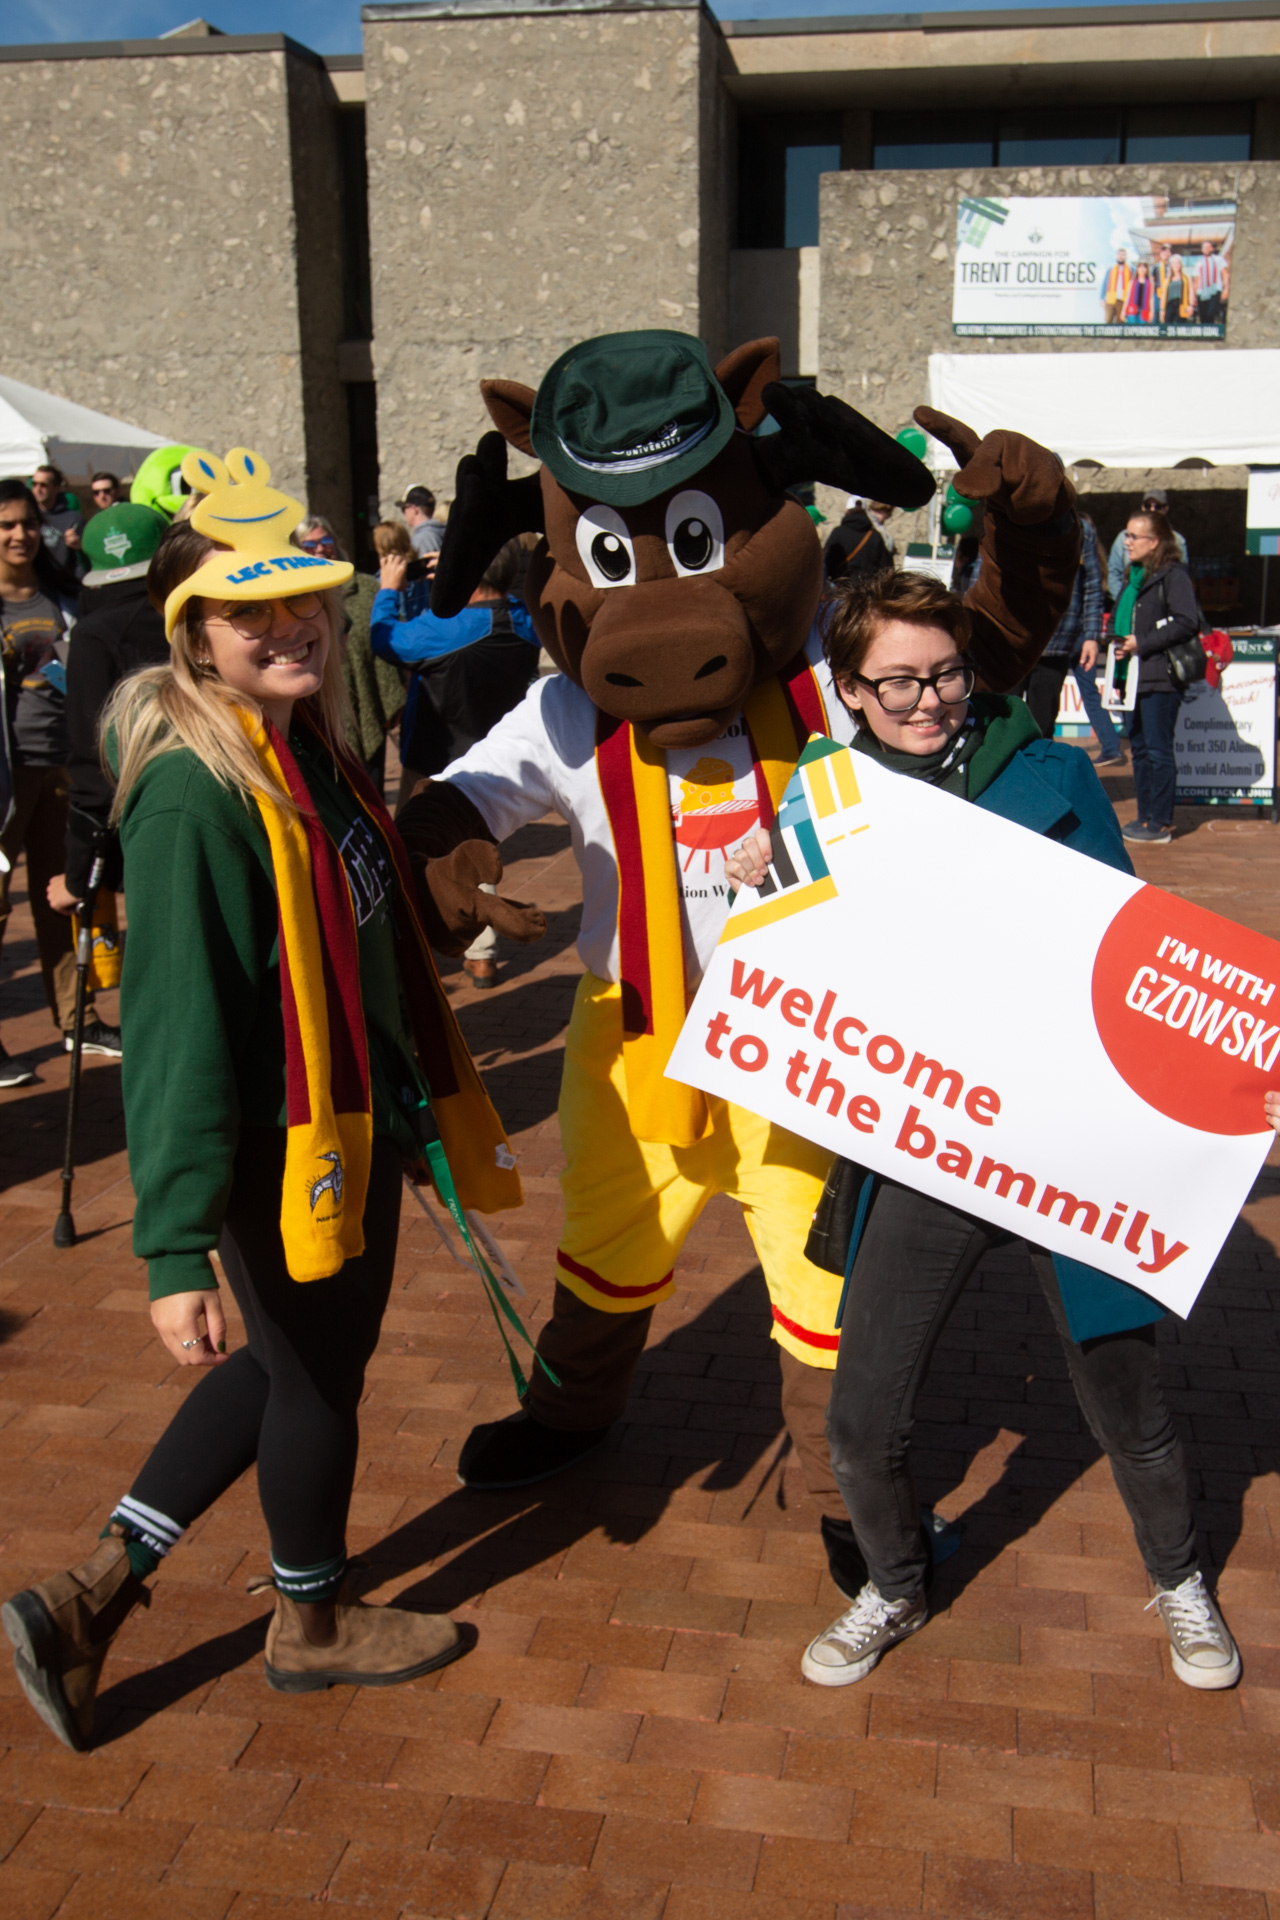 Bamm the moose at an event posing for a picture with two individuals